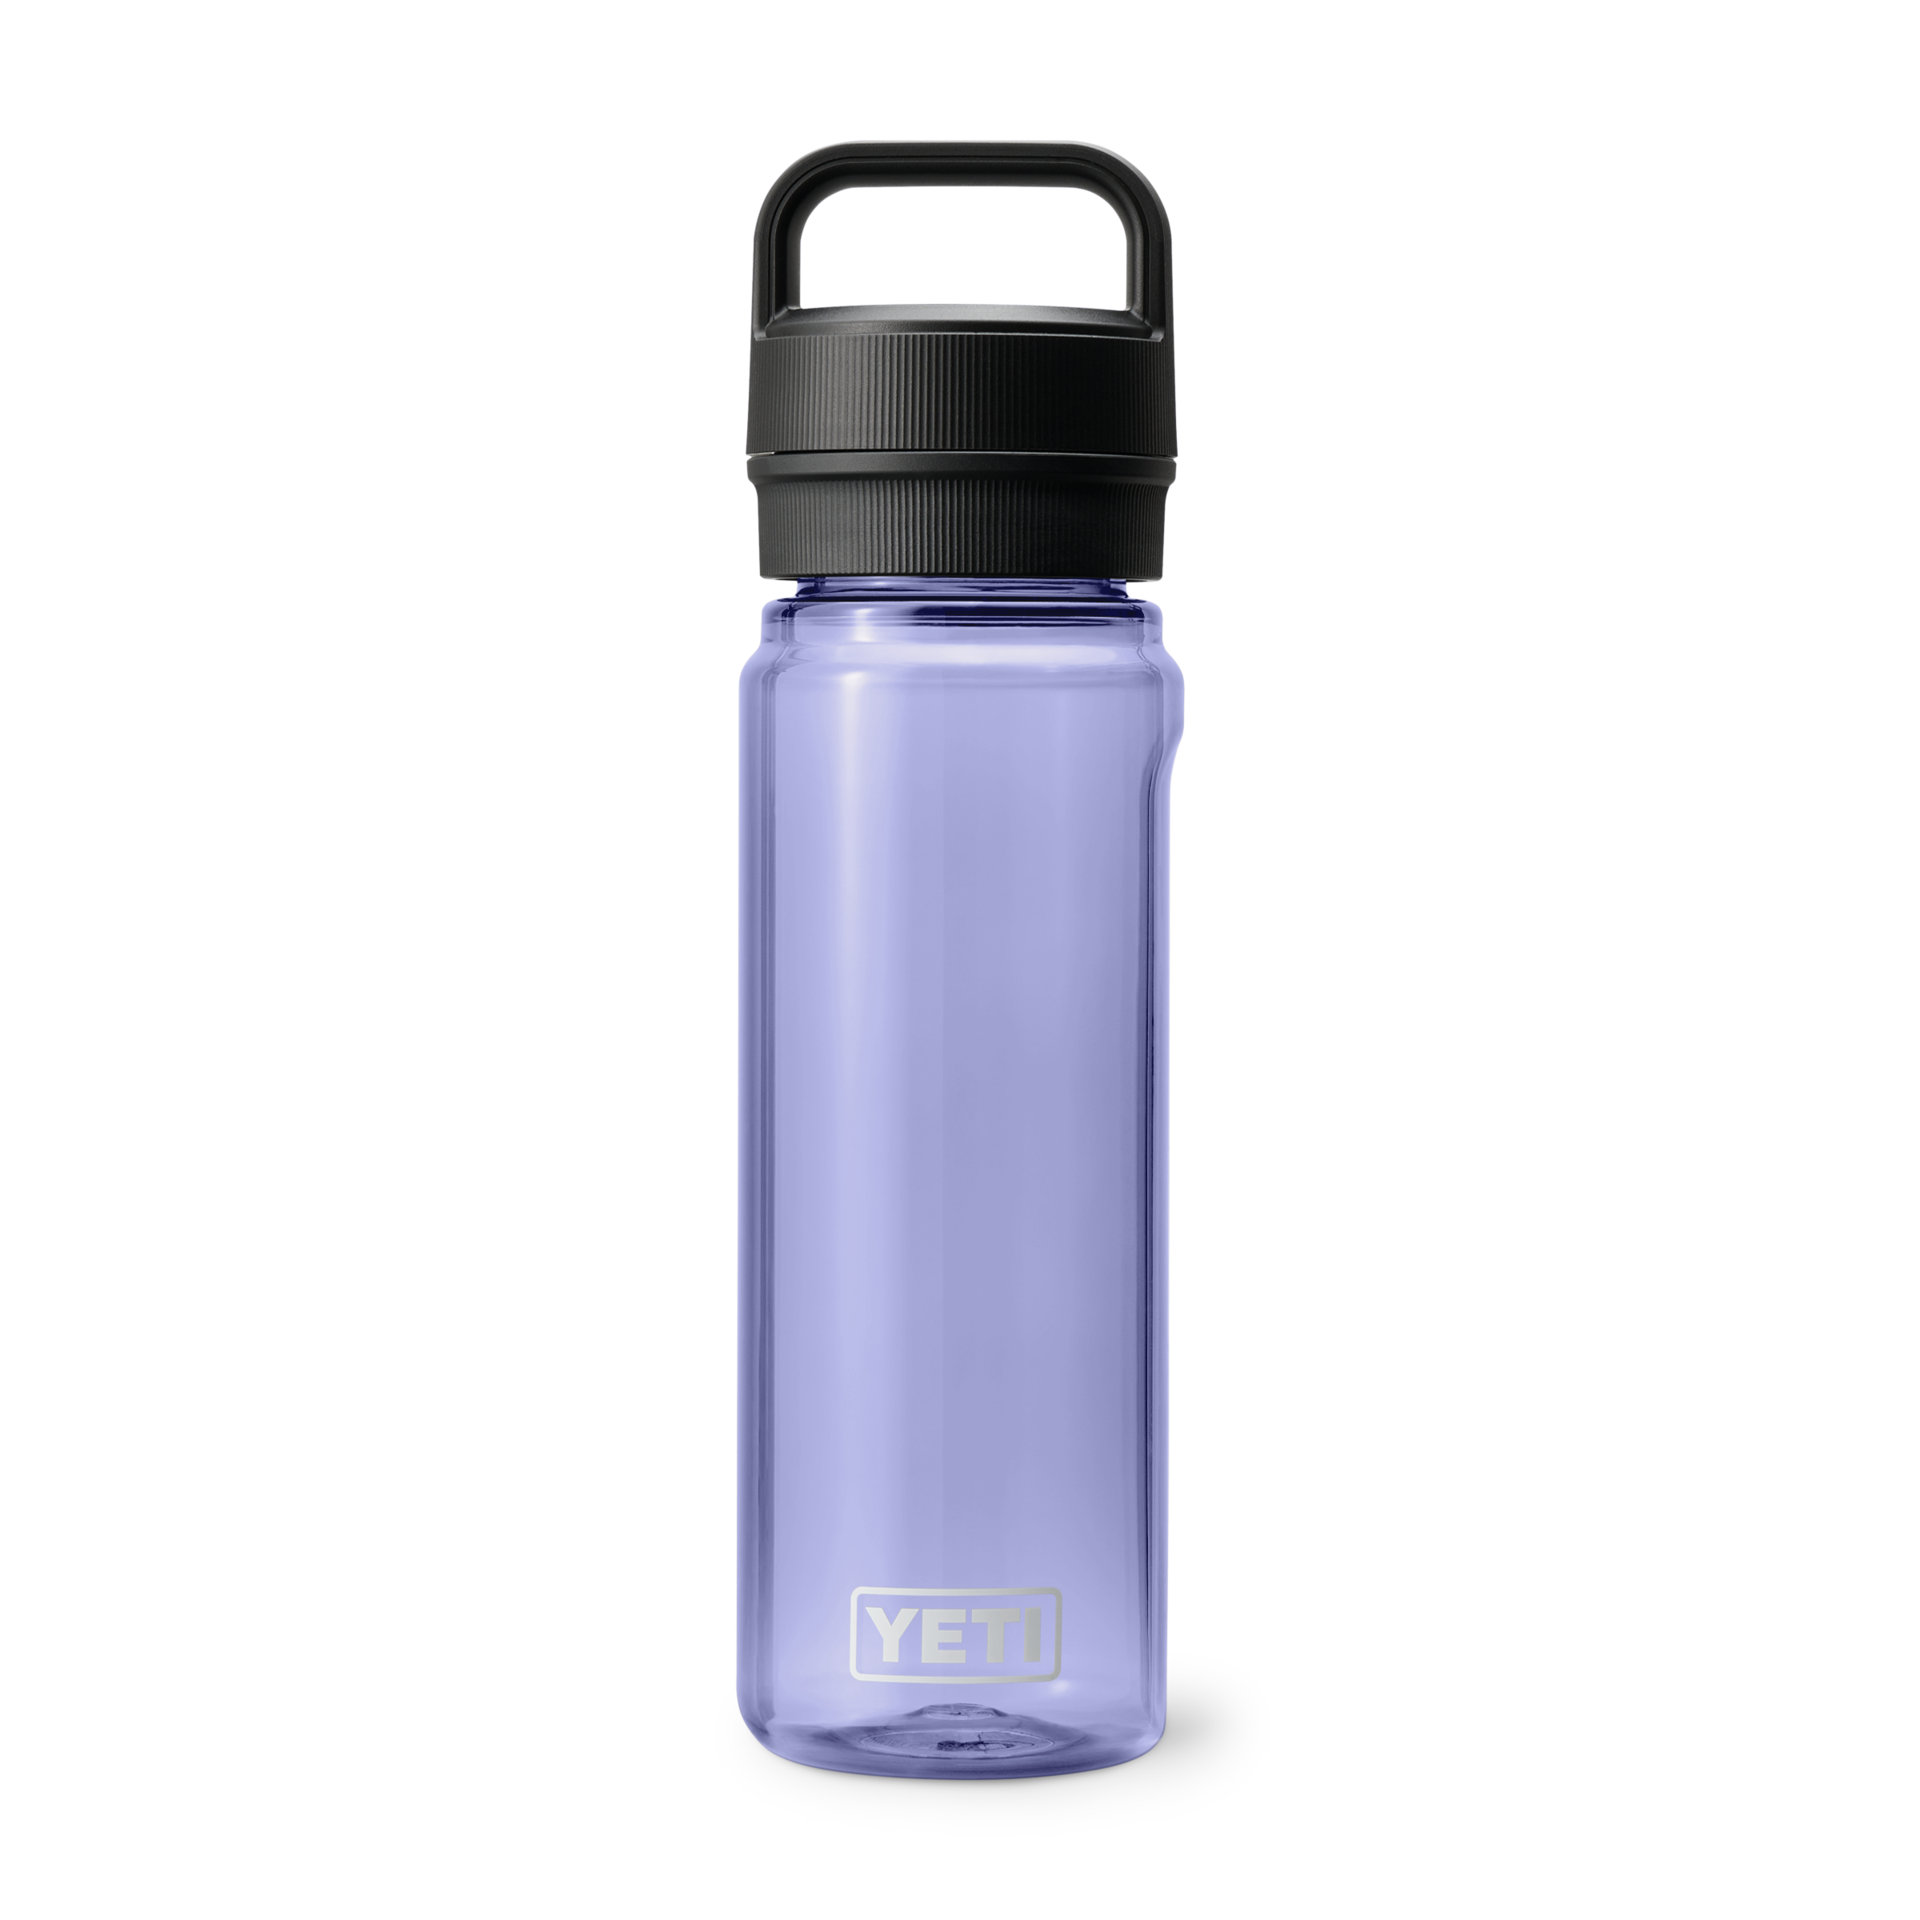 W-220111_2H23_Color_Launch_Drinkware_site_studio_Yonder_750mL_Cosmic_Lilac_Front_0771_Primary_B_2400x2400_df4eca9a-5a0d-40ad-abe0-b12c0ece768b.png